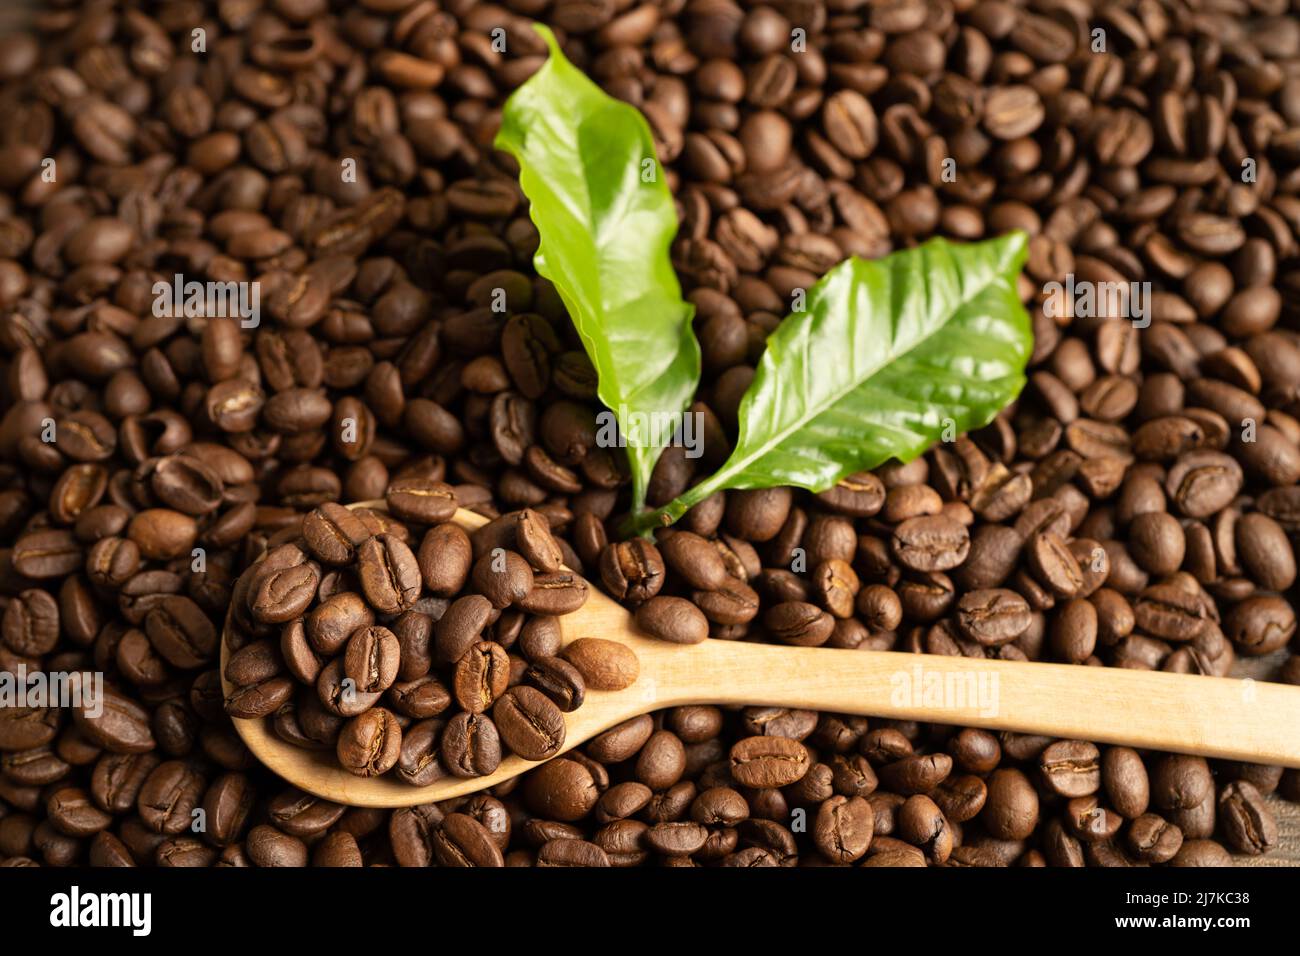 Coffee bean medium roasted on wood spoon with leaf in fresh morning. Stock Photo